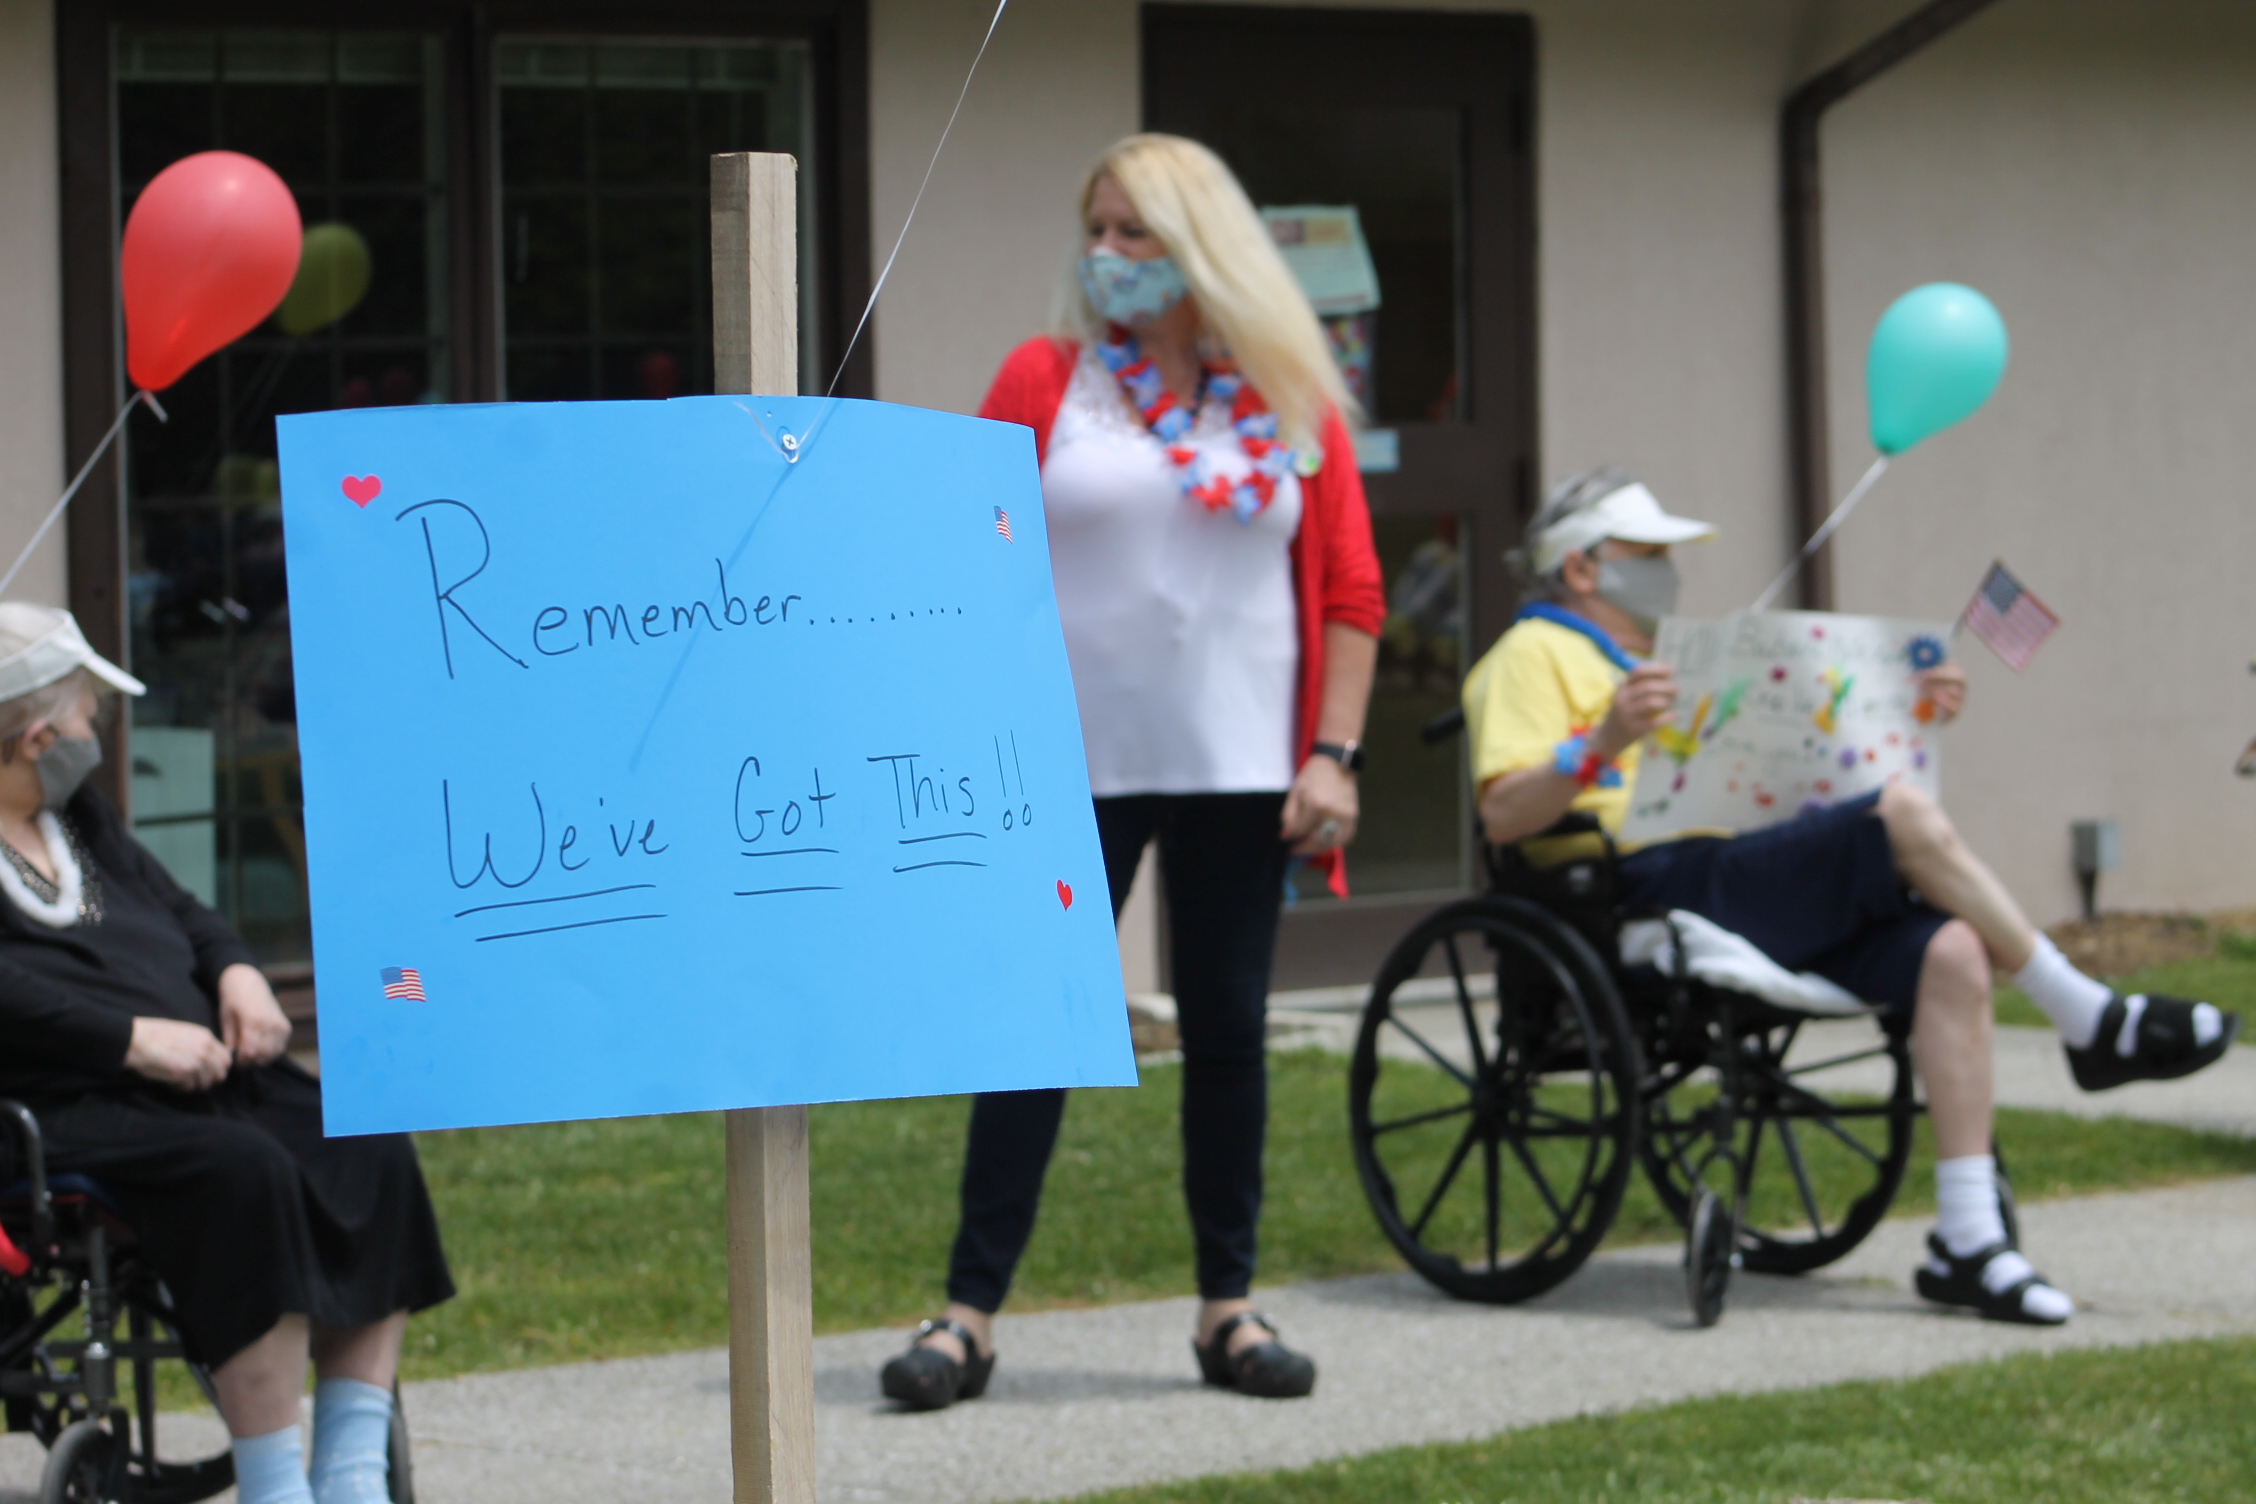 Positive posters like this one which reads "Remember... We've got this!" appeared around the Brian Center during the parade on May 14. (Photos by Juliana Walker/MNJ)